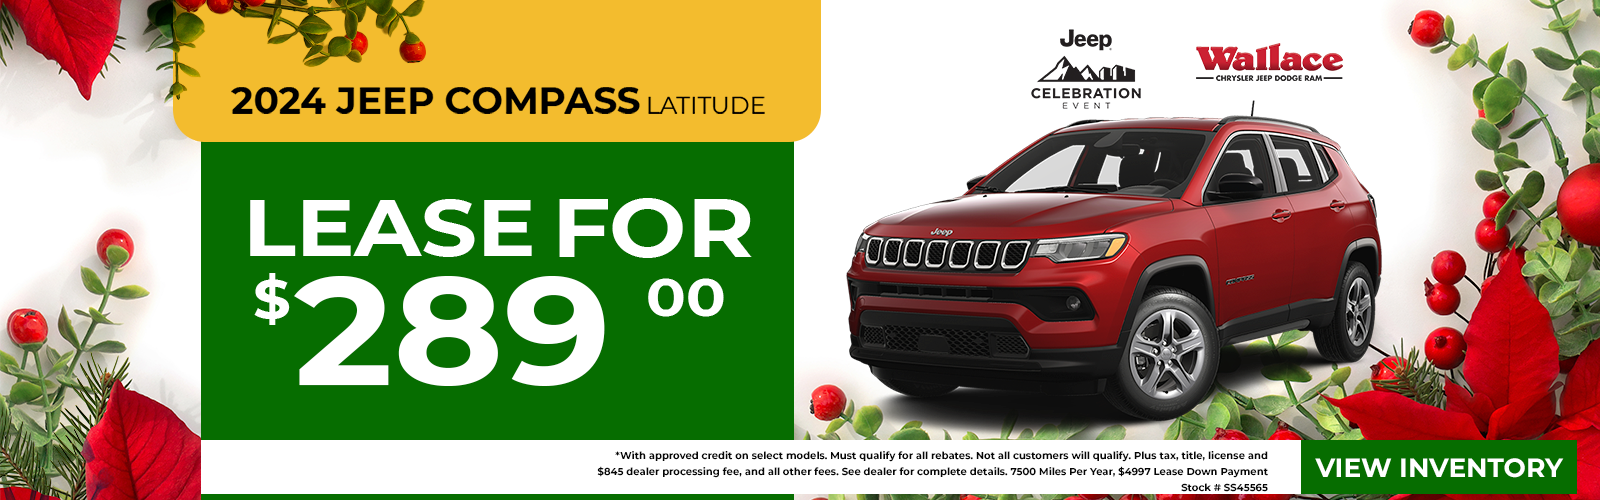 Jeep Compass Special Offer